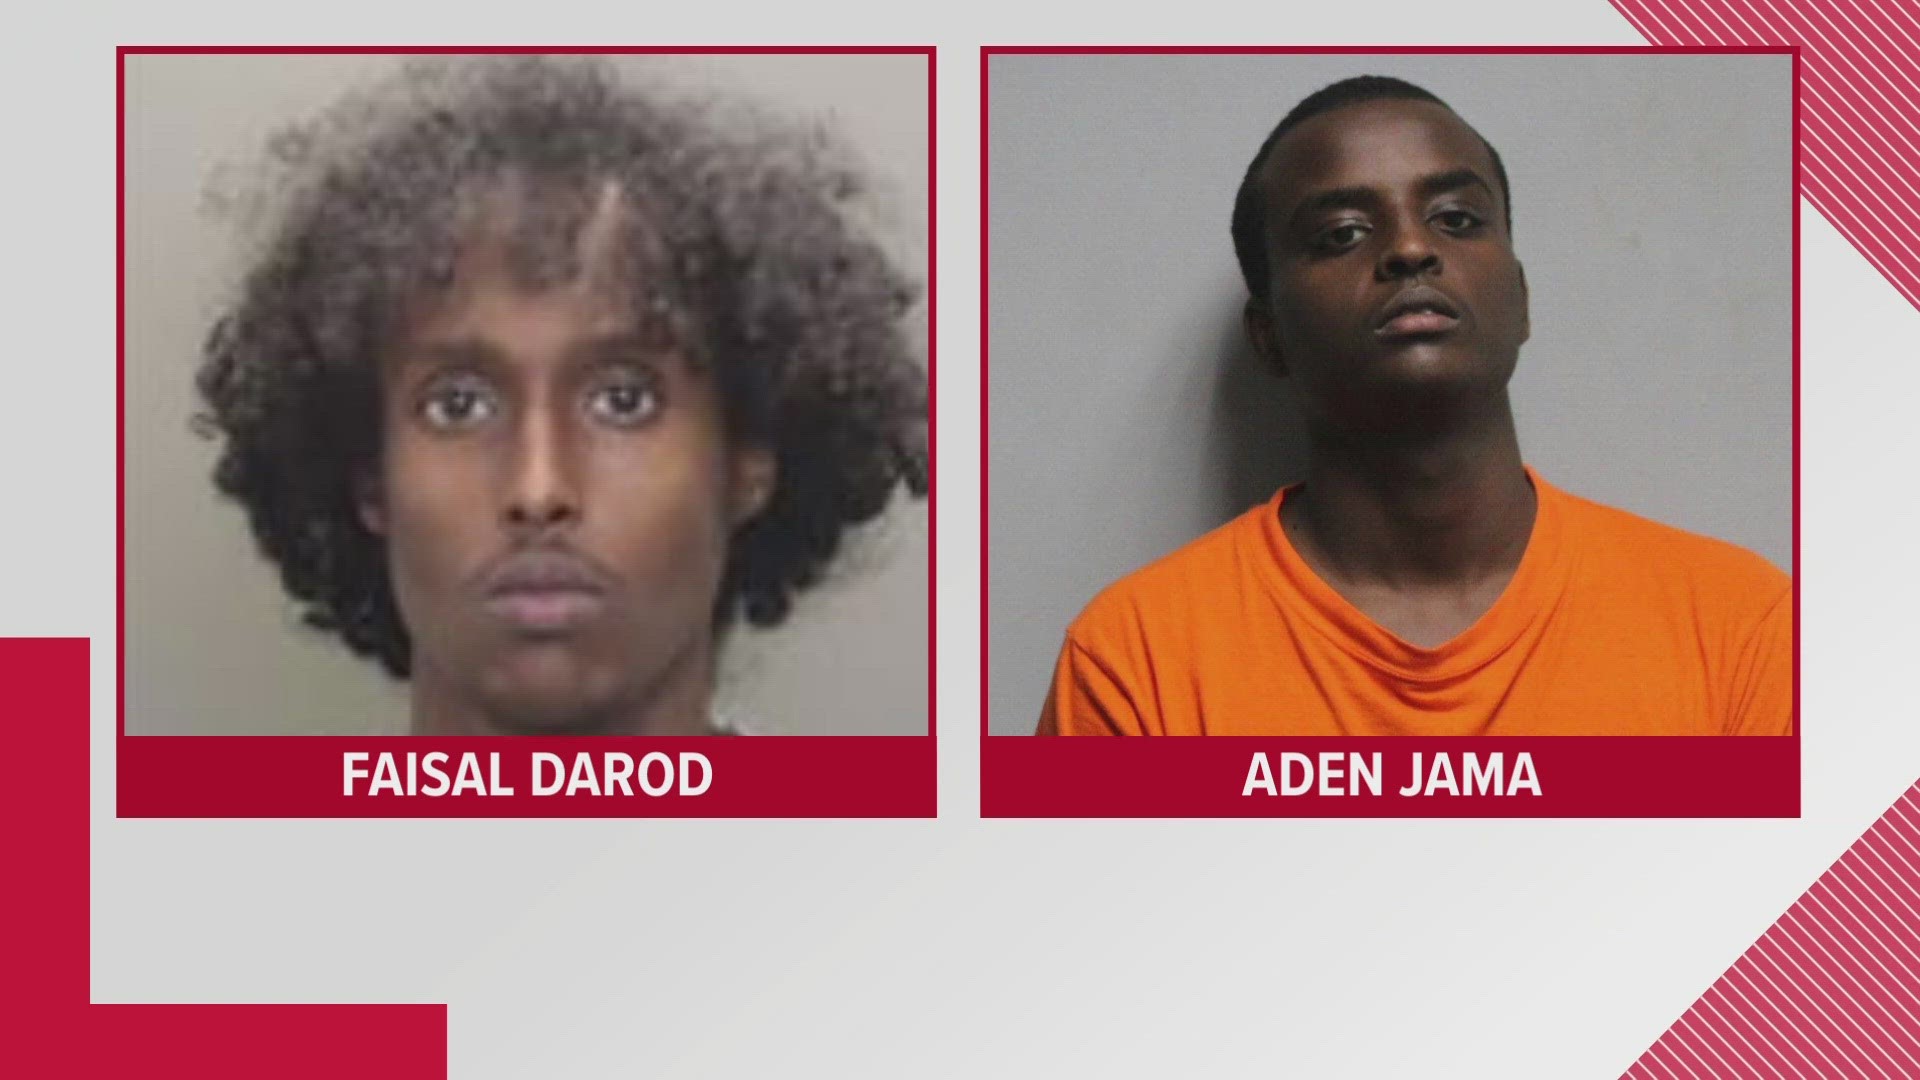 Faisal Darod and Aden Jama were each indicted on new charges on Wednesday.